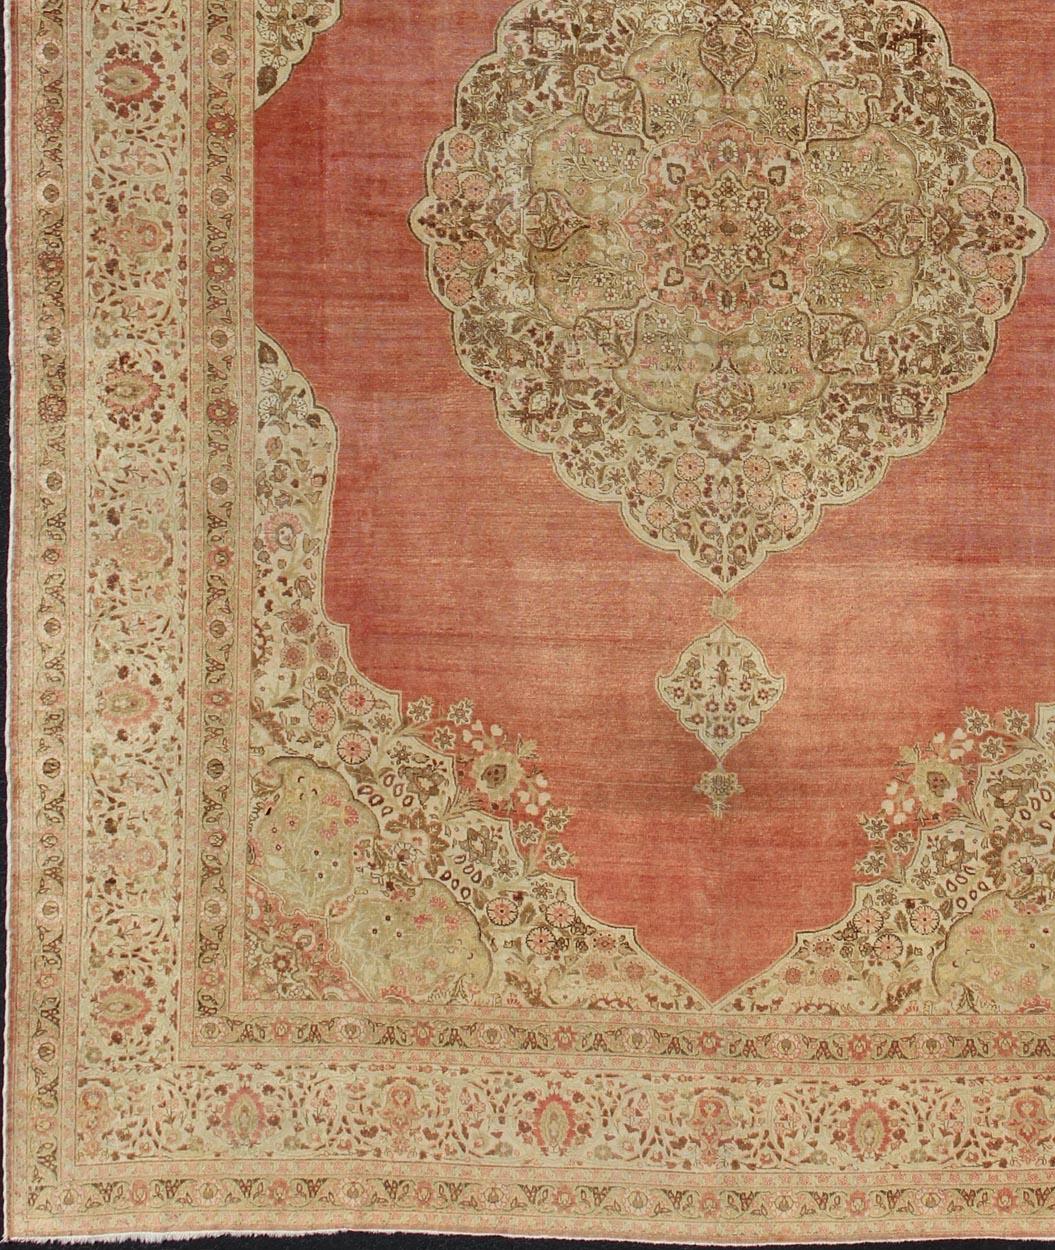 Large antique Turkish Sivas rug with Medallion design in pink red, salmon, light yellow green, and light brown highlights. Keivan Woven Arts / rug 16-0903, country of origin / type: Turkey / Sivas, circa Early-20th century. 
Measures: 12'8 x